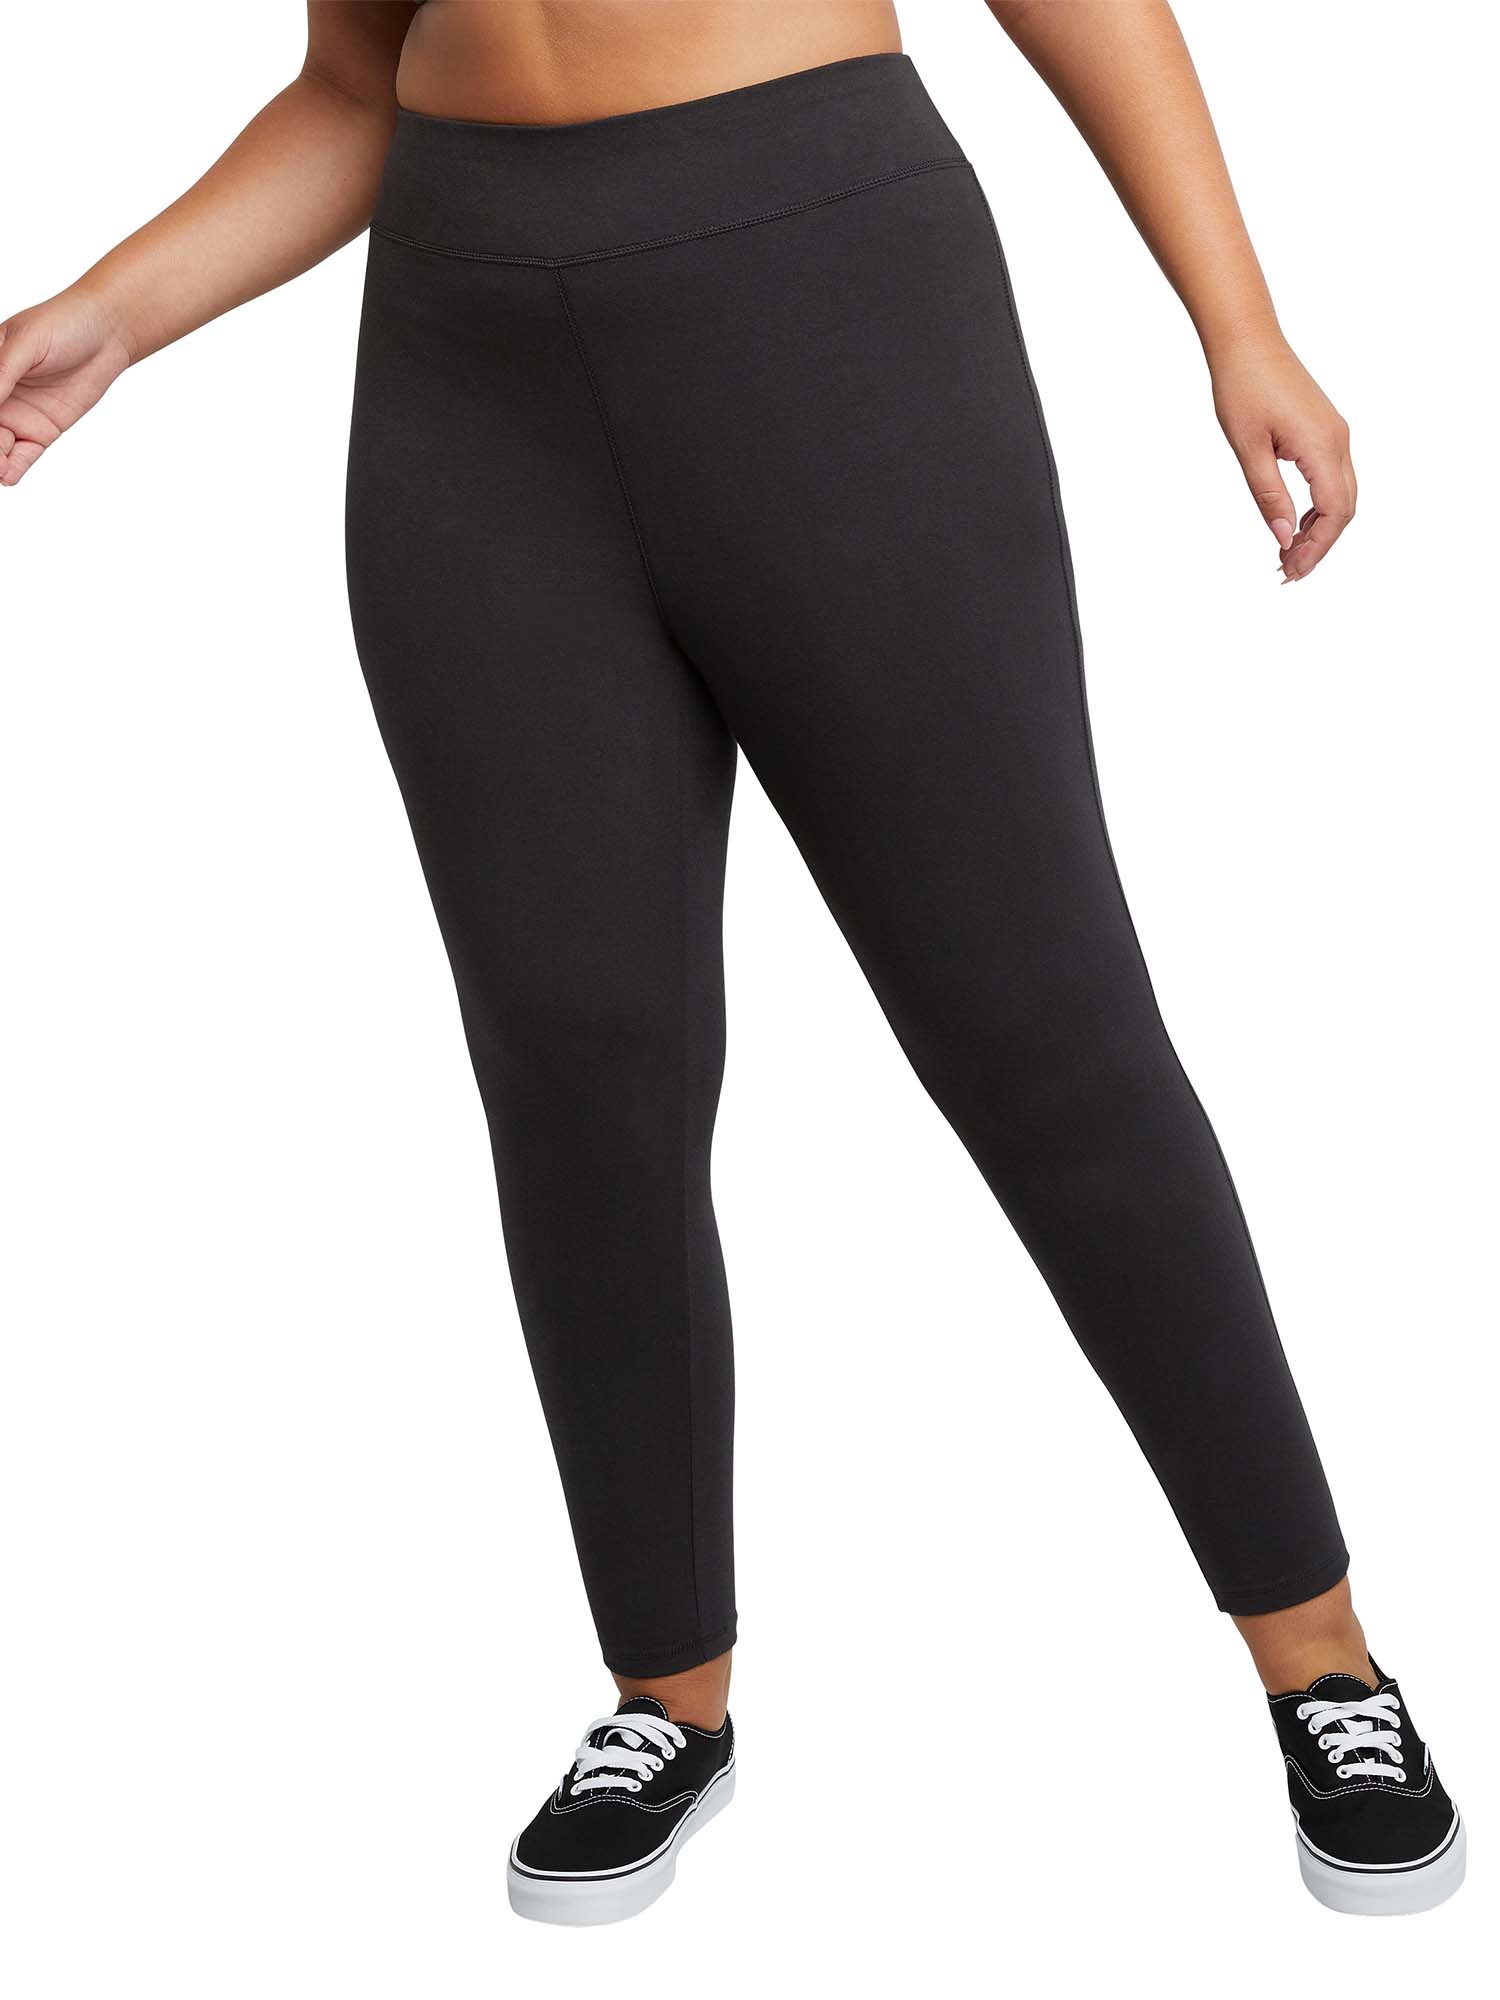 JMS by Hanes Women's Plus Size Stretch Jersey Legging - image 1 of 6